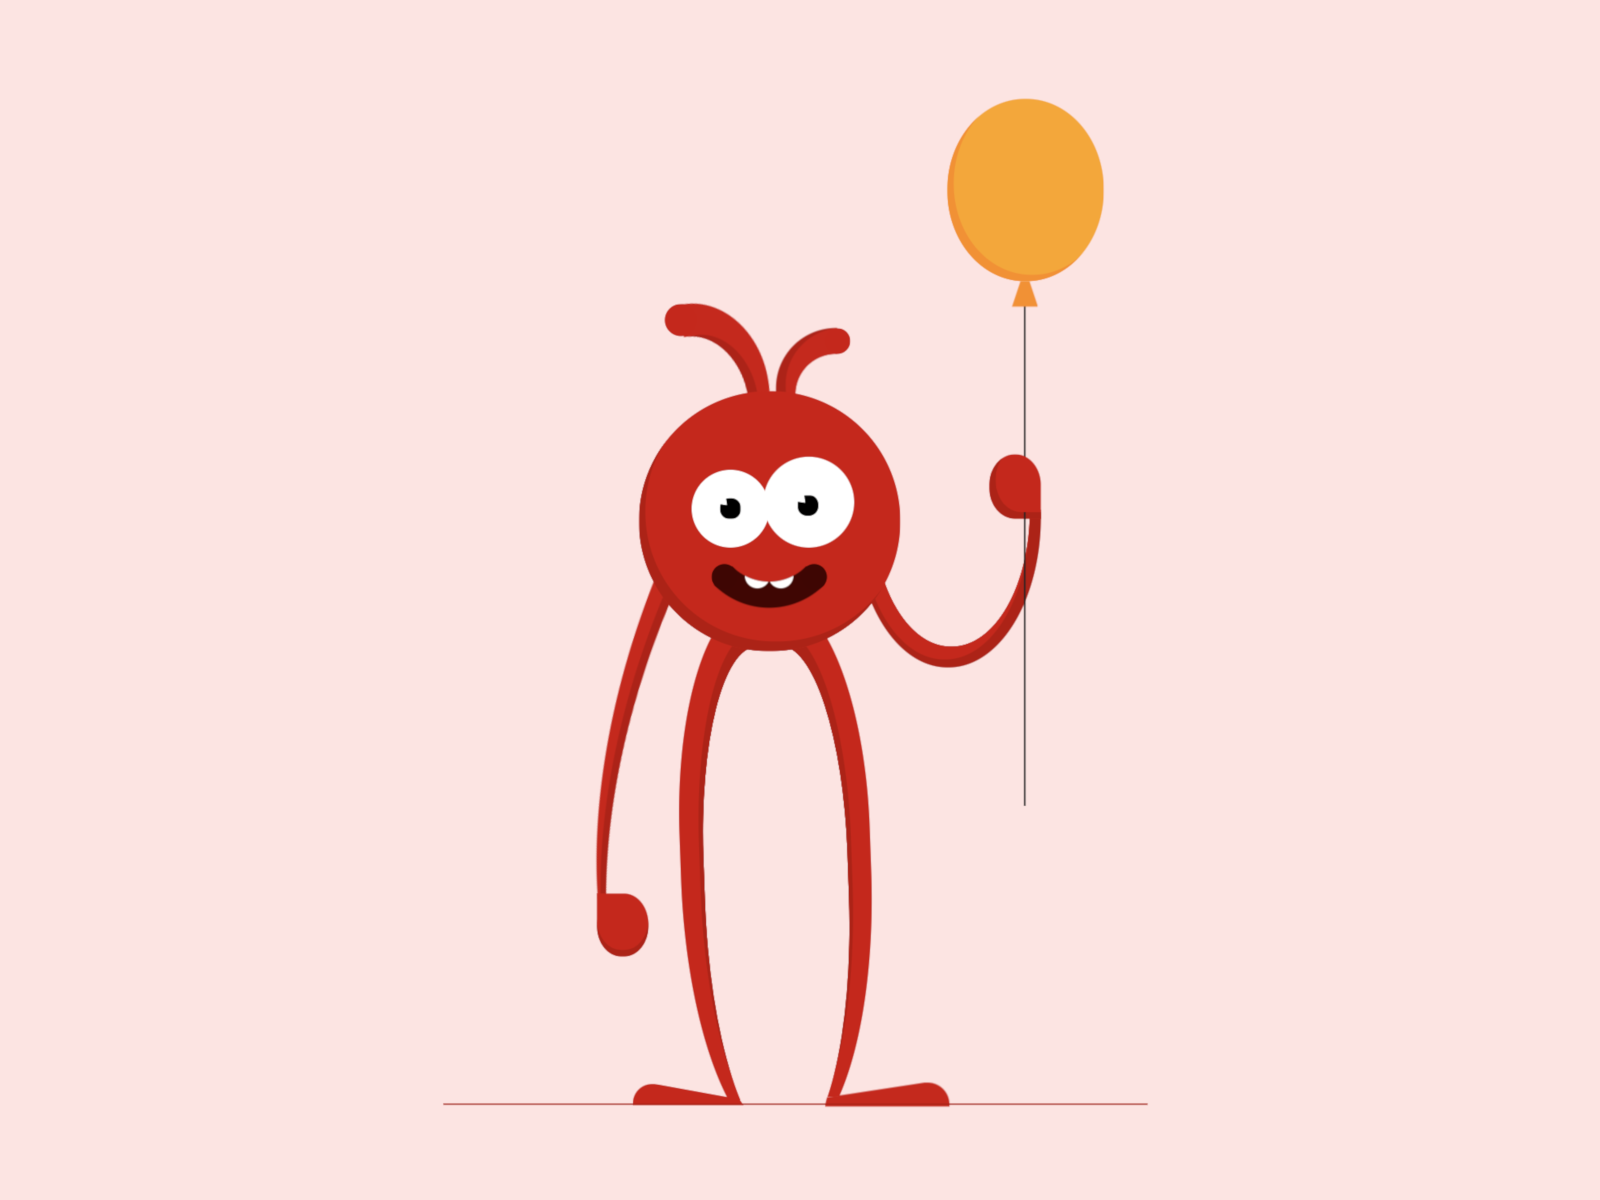 Red monster holding a balloon